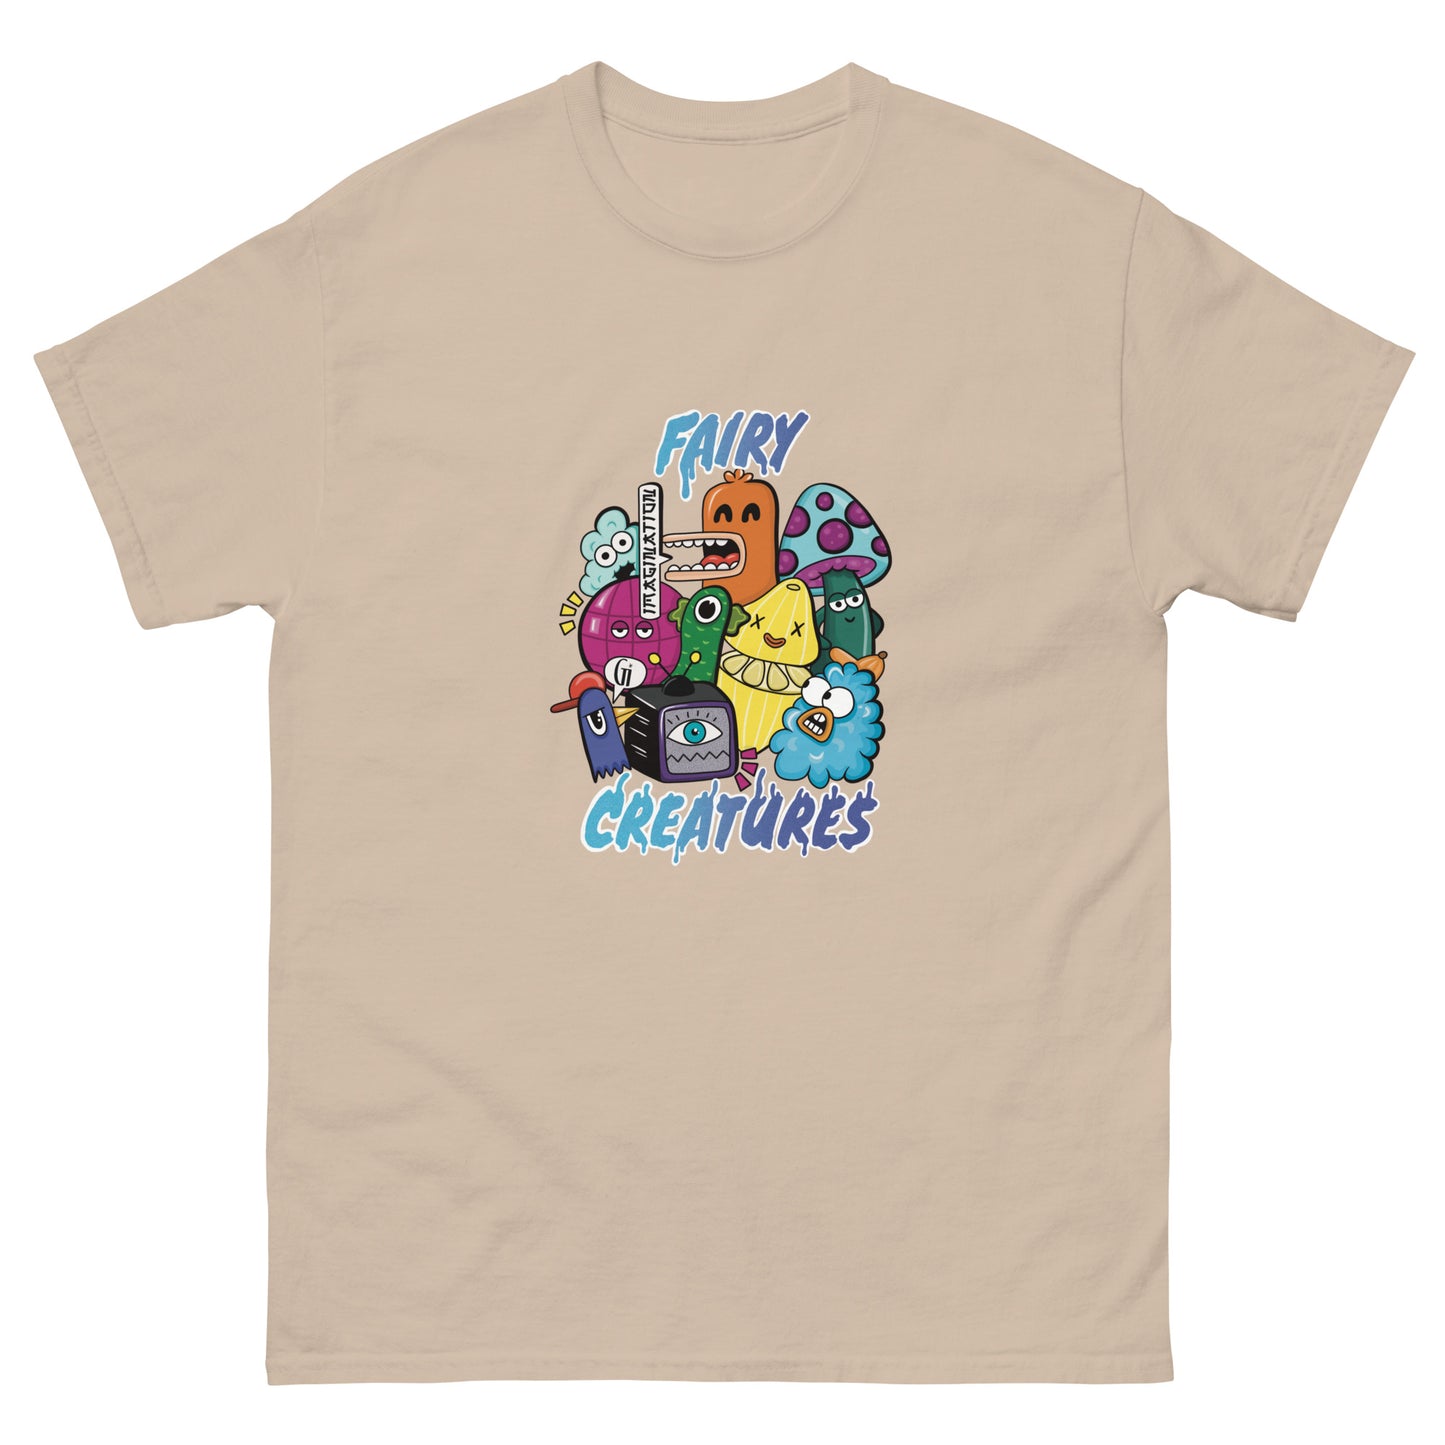 sand color cotton t shirt with fairy creatures